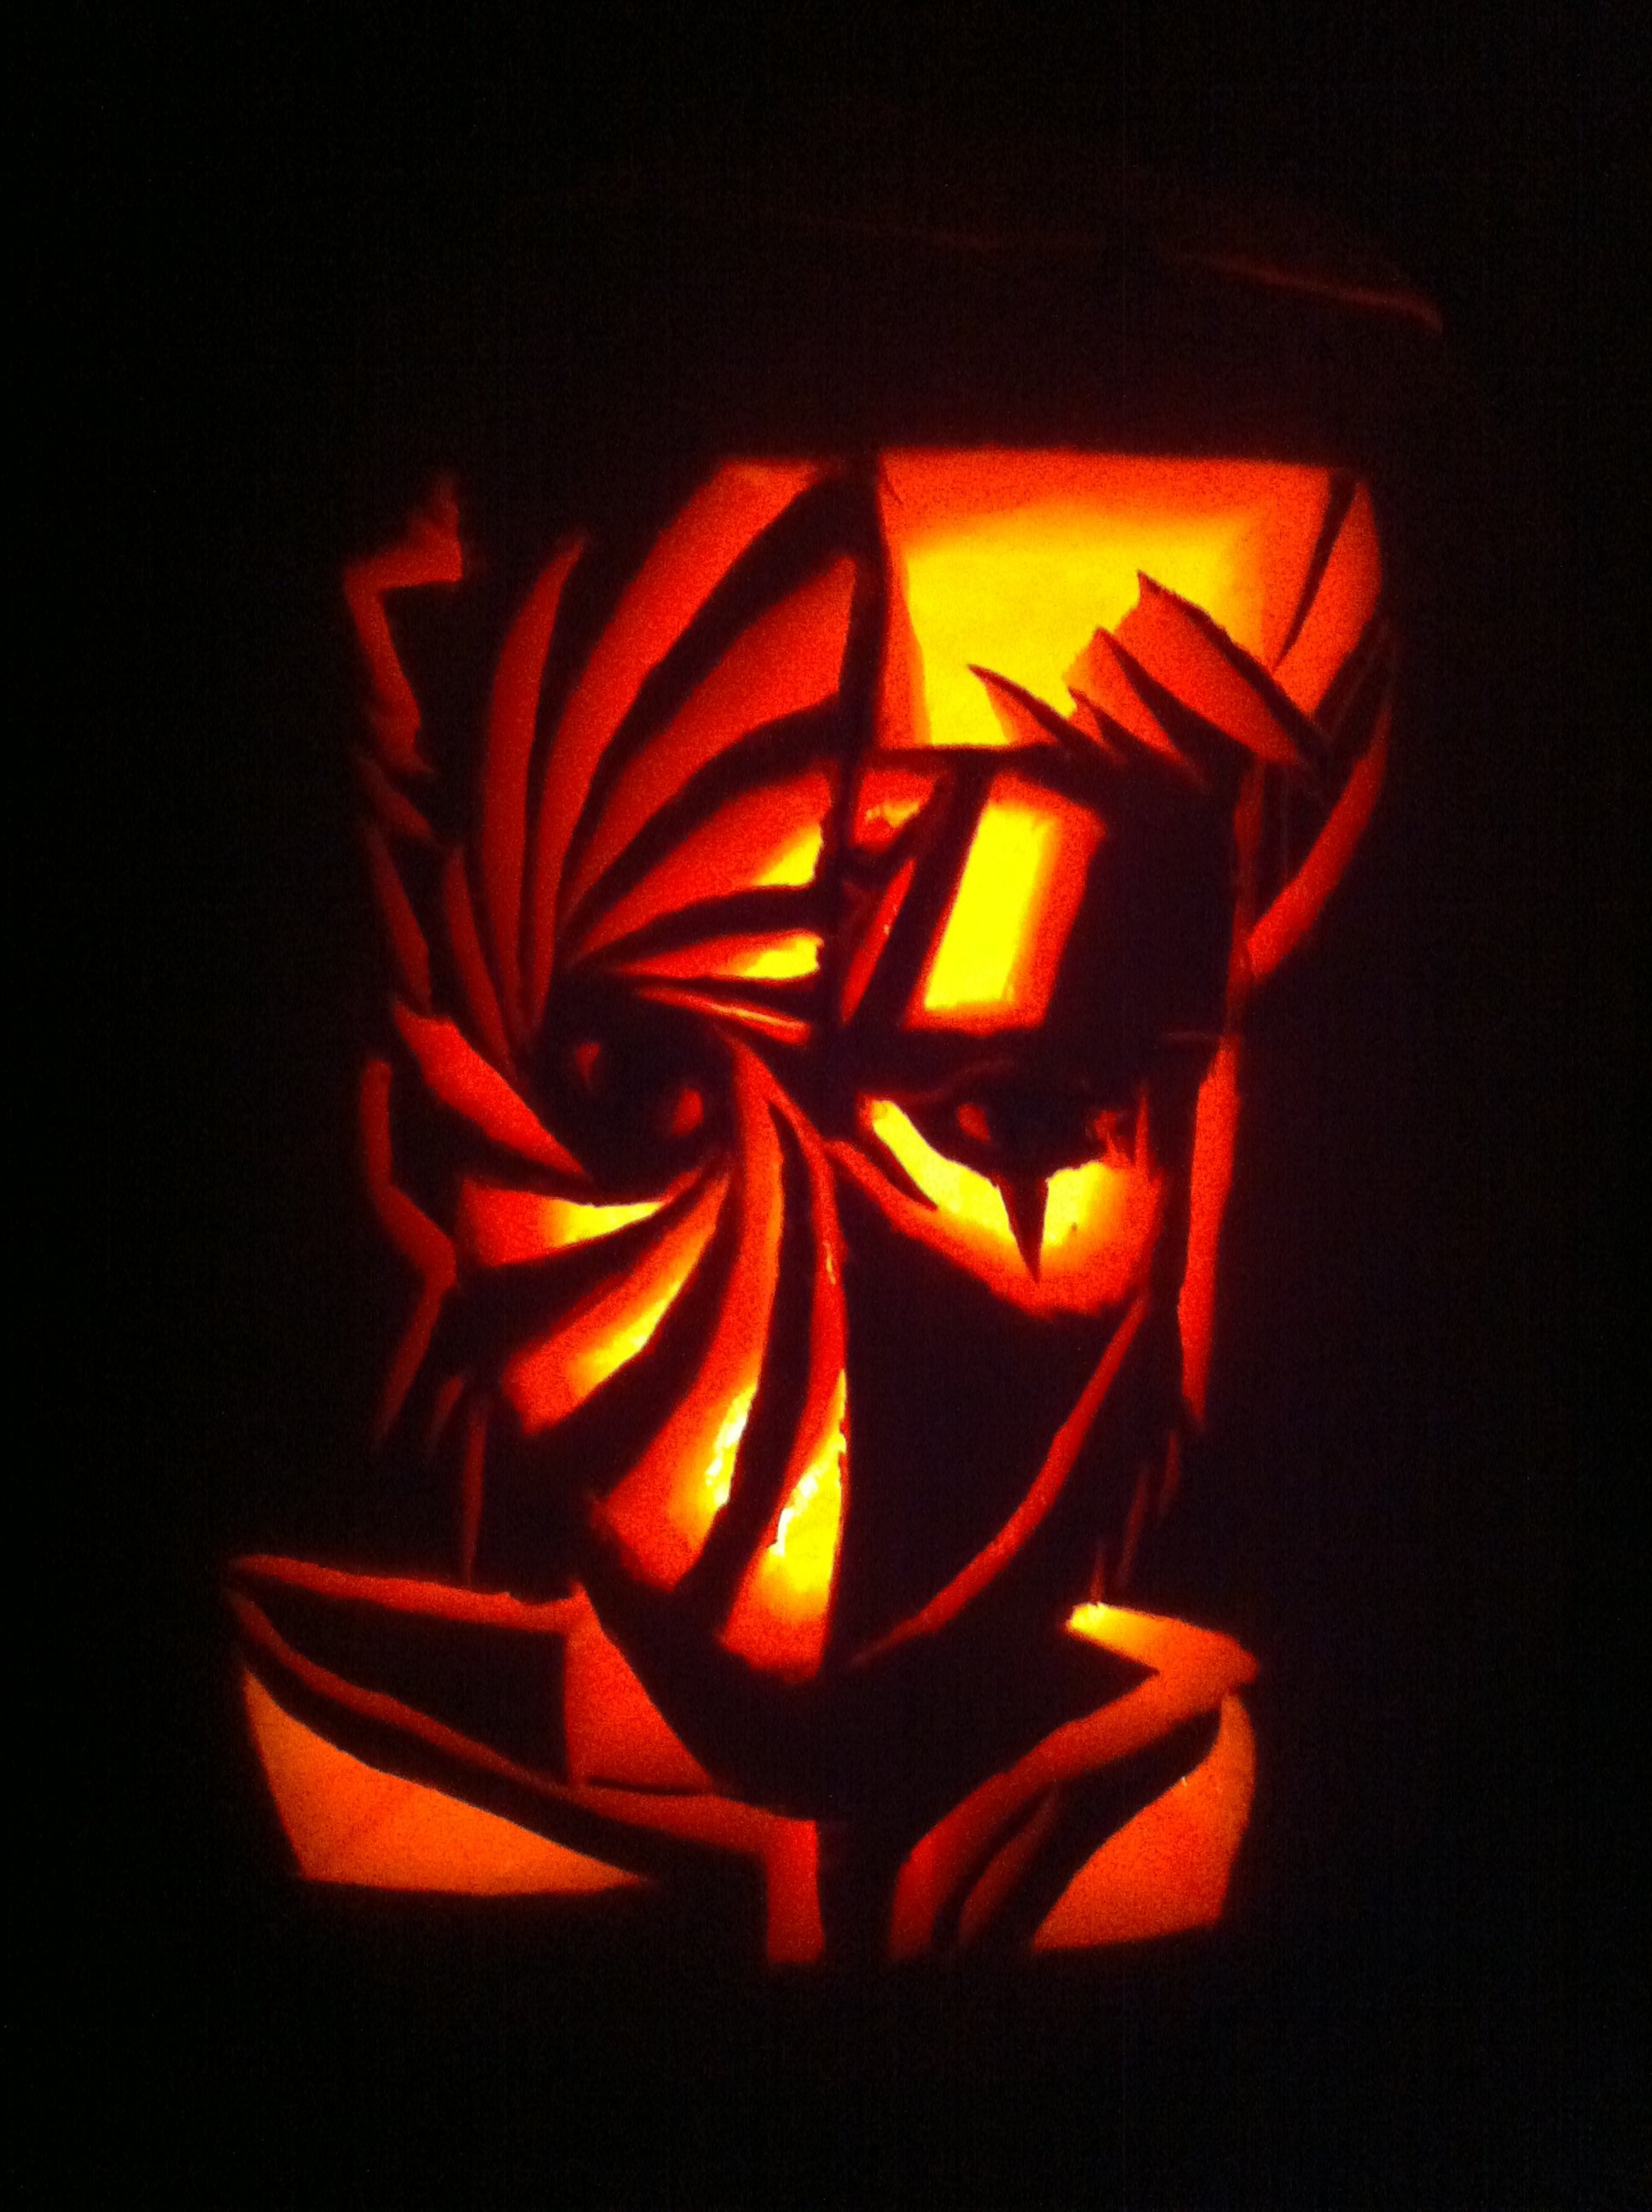 ANNual Pumpkin Carving Contest - Entries [2012-11-18] - Anime News Network